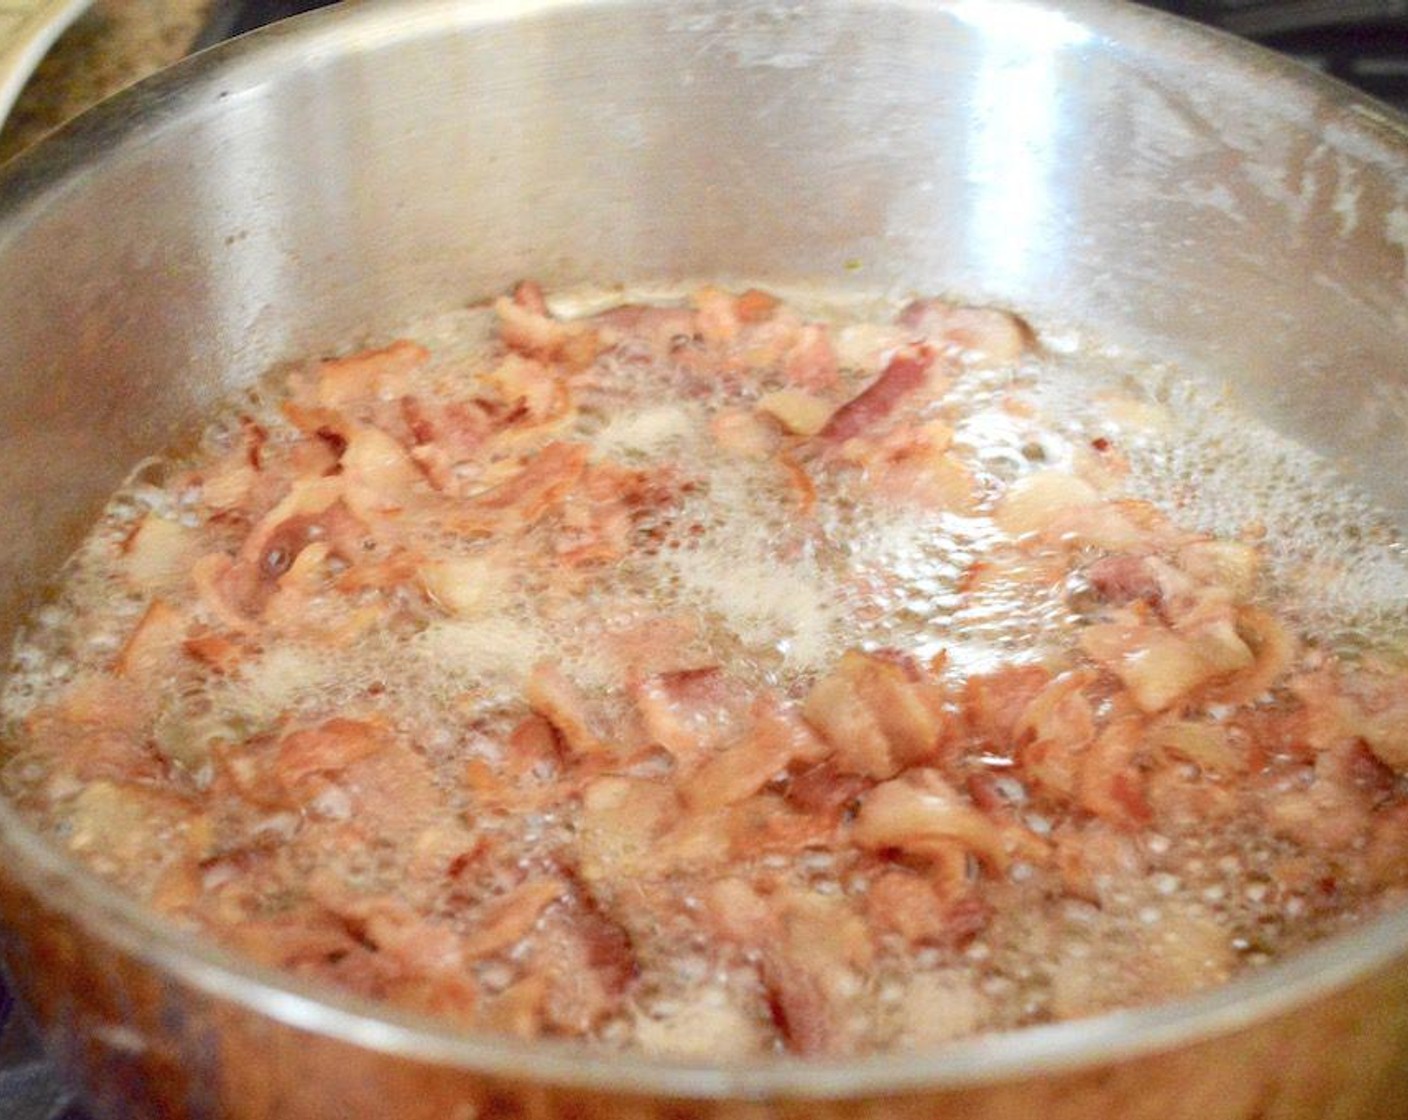 step 1 First, cook the Bacon (10 slices). Add it to a cold, large skillet with deep sides and then heat it up over medium high heat. Let it cook completely and render out the gorgeous liquid gold fat until it is crispy.